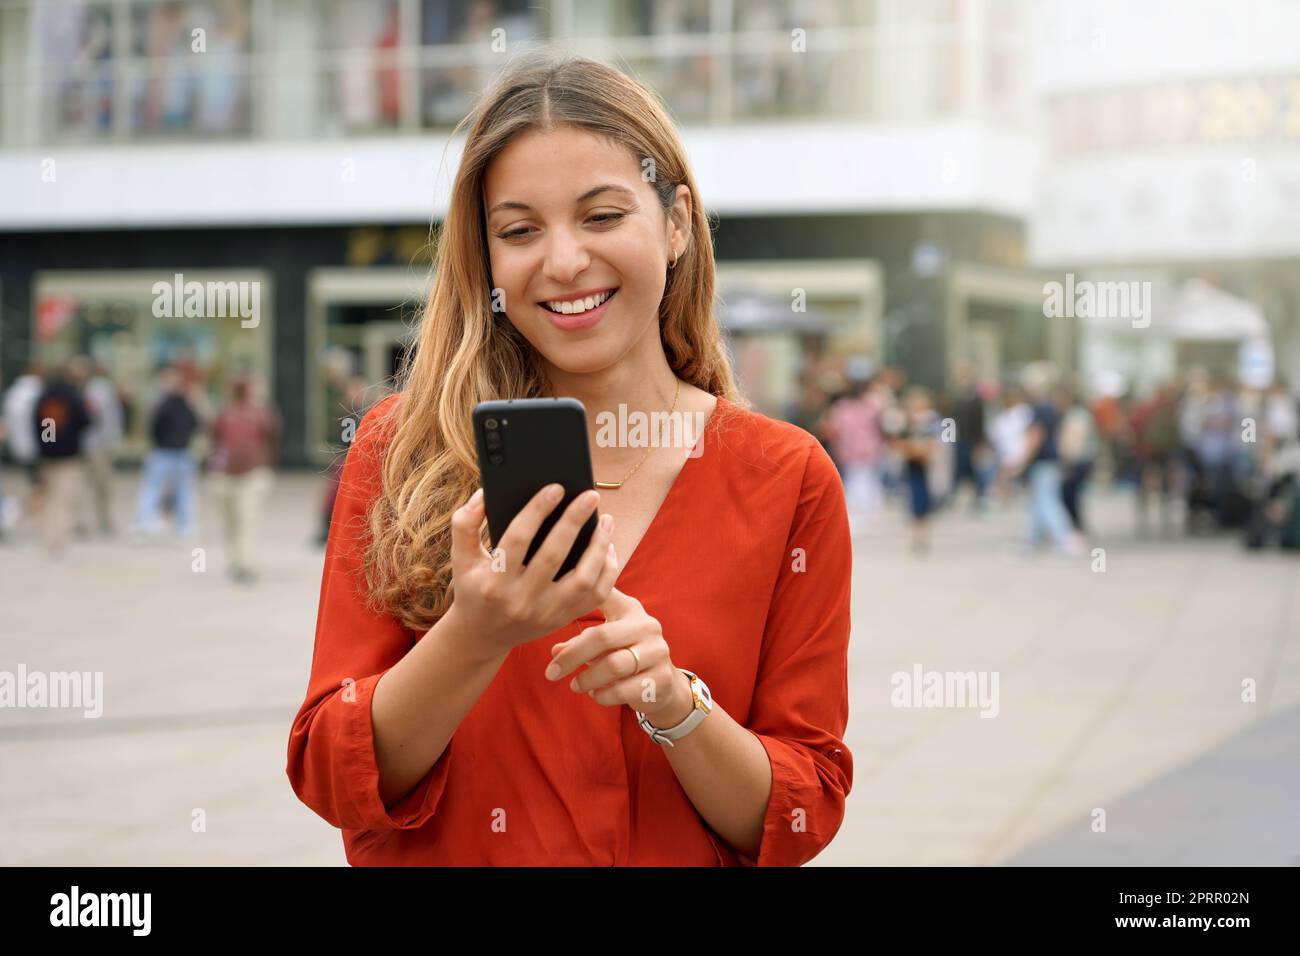 Portrait of smiling young woman using a smartphone app in Berlin, Germany Stock Photo